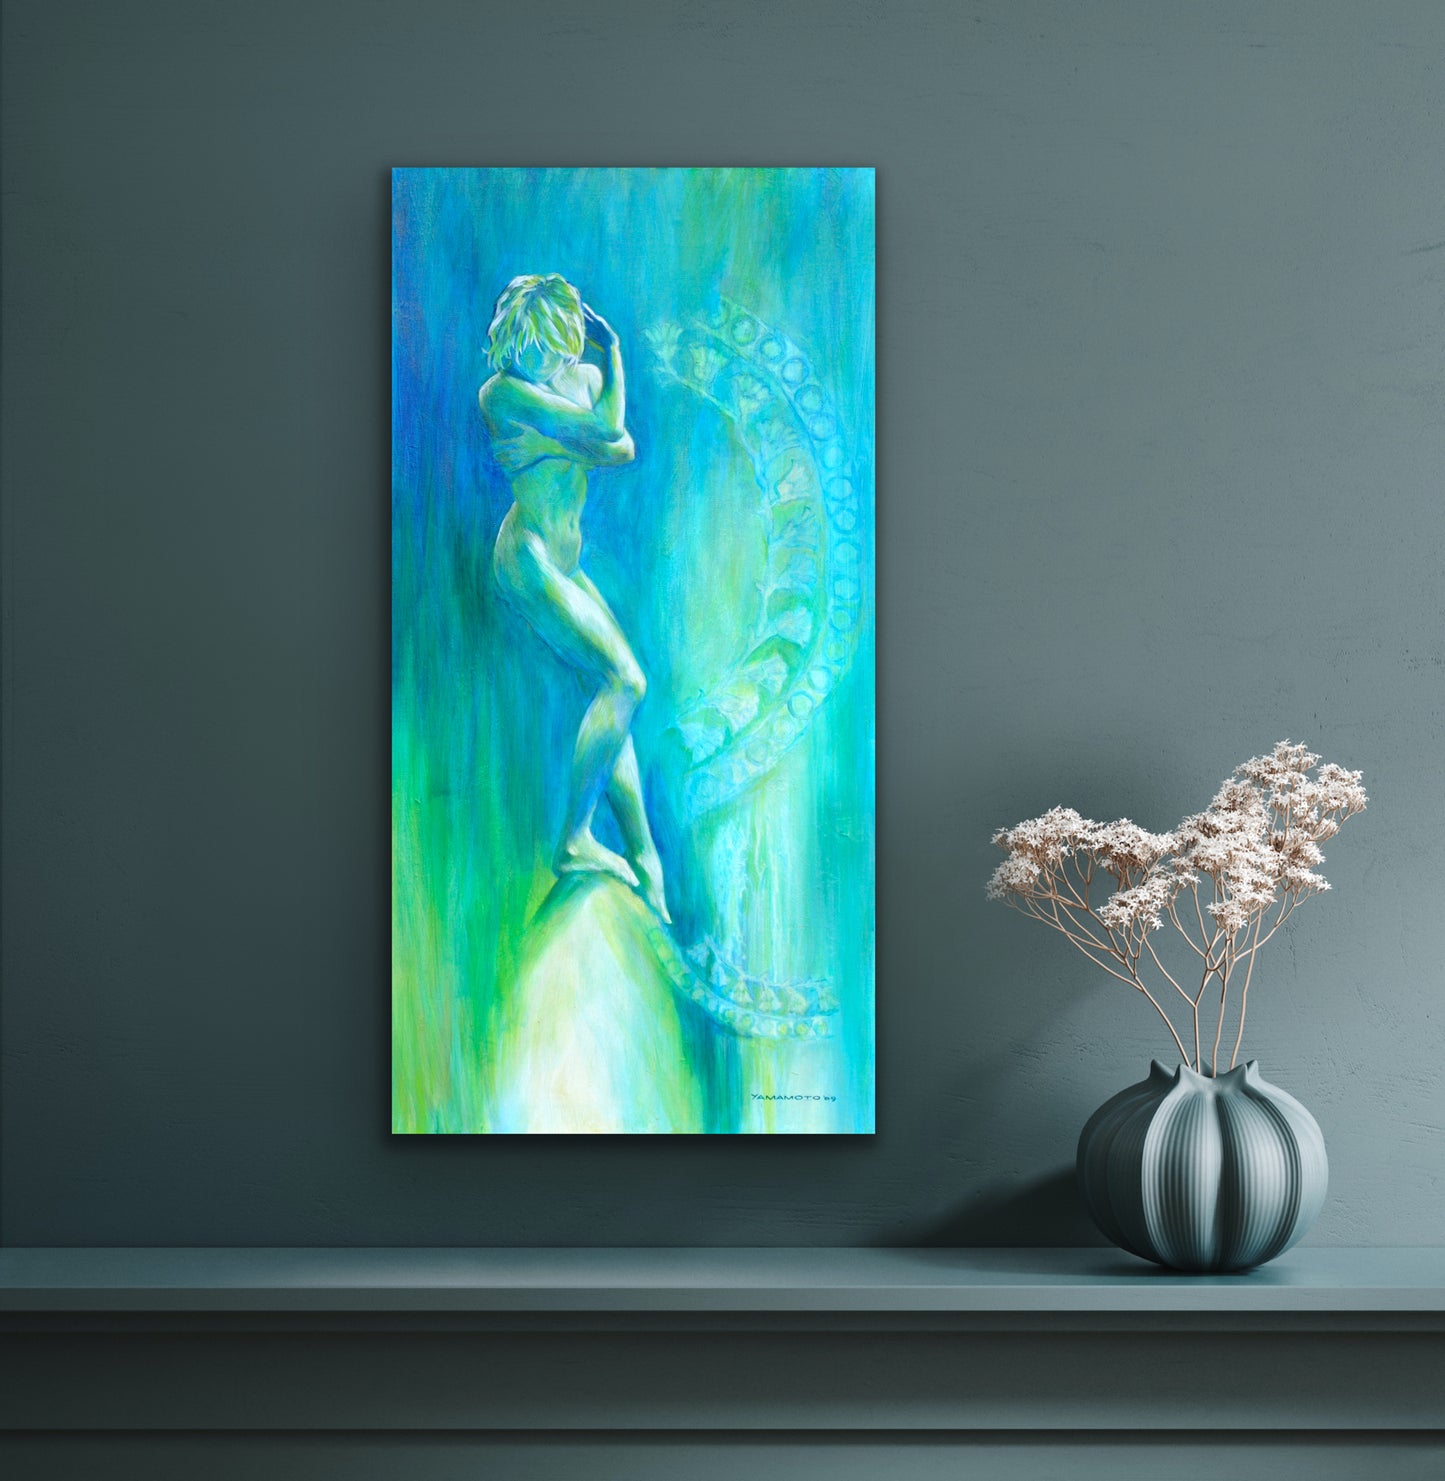 Stepping Into Her Sacredness - a woman in profile wall art